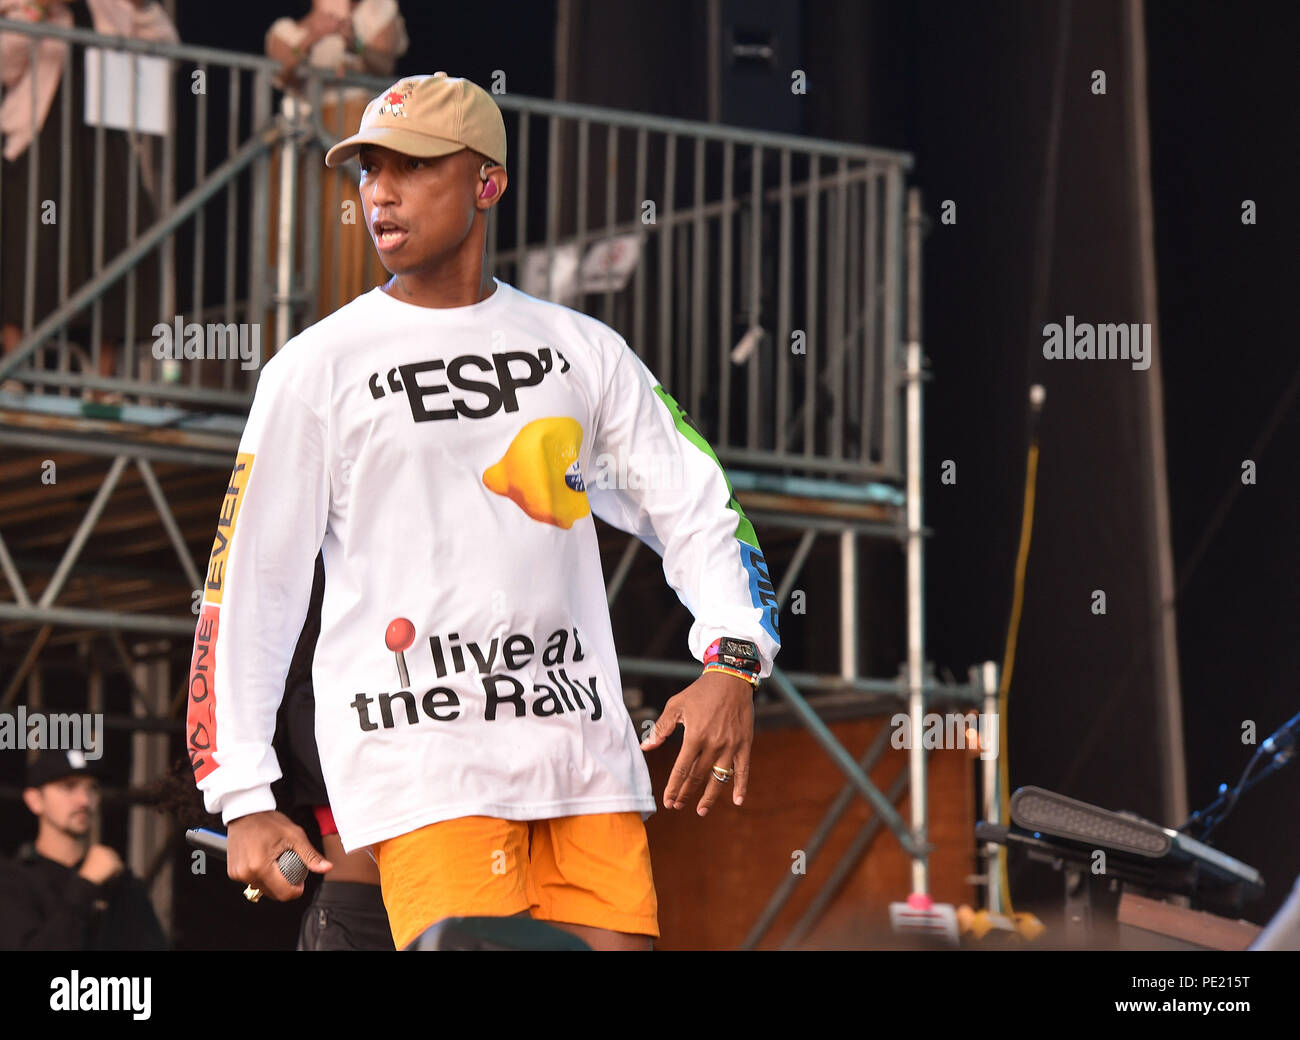 San Francisco, Ca. 10th Aug, 2018. Pharrell Williams of N.E.R.D performs during the 2018 Outside Lands Musis and Arts Festival in Golden Gate Park on August 10, 2018 in San Francisco, California. Credit: Image Space/Media Punch/Alamy Live News Stock Photo